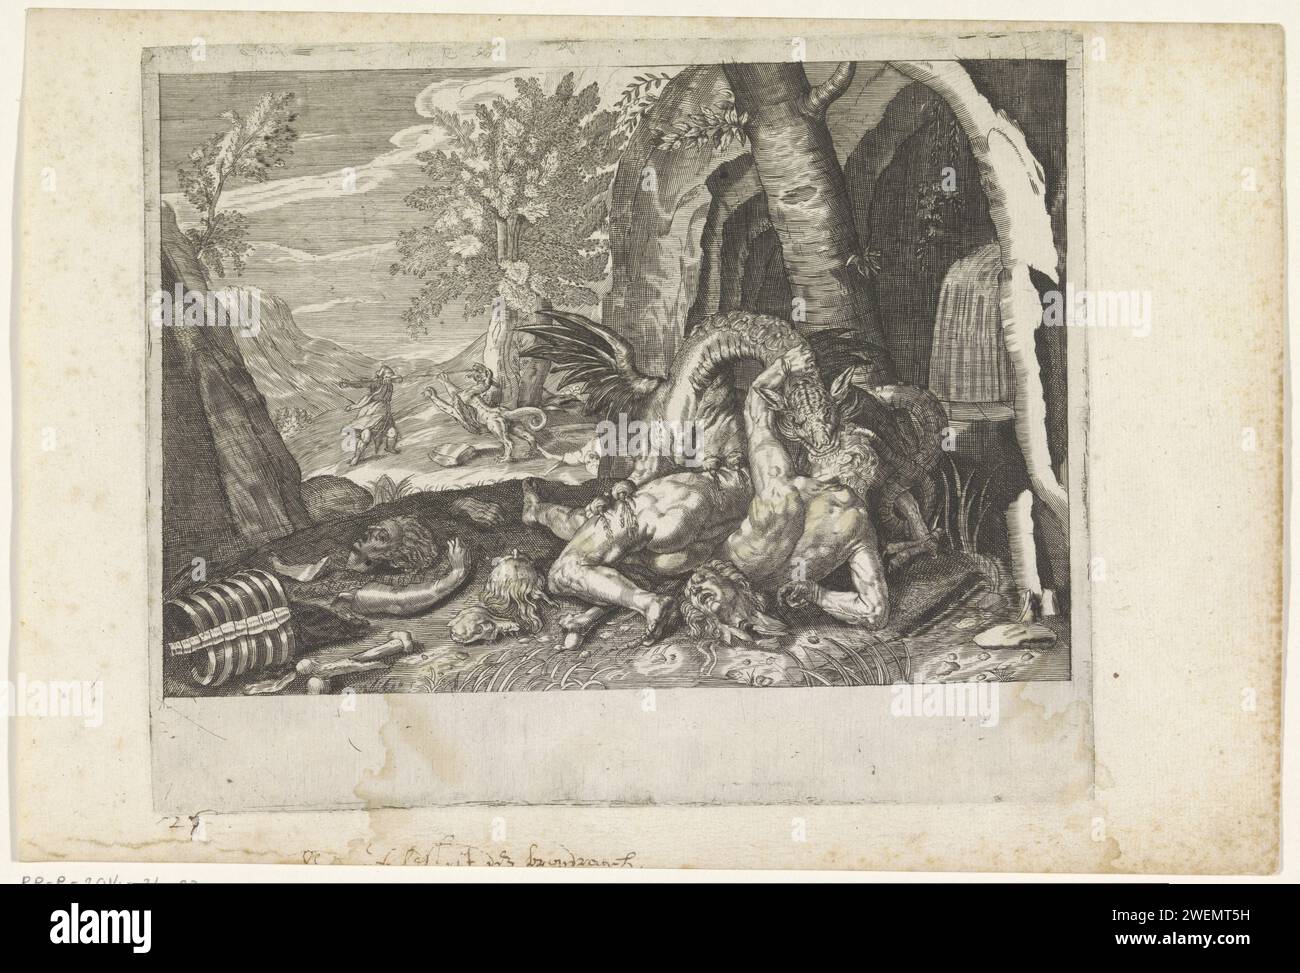 Cadmus' companions devoured by a dragon, c. 1636 - 1670 print For a cave, a dragon kills the companions of Cadmus, founder of Thebe. Cadmus kills the dragon in the background.  paper engraving Cadmus' companions, sent to fetch water, are slain by the dragon which guarded the spring. Cadmus slays the dragon Stock Photo